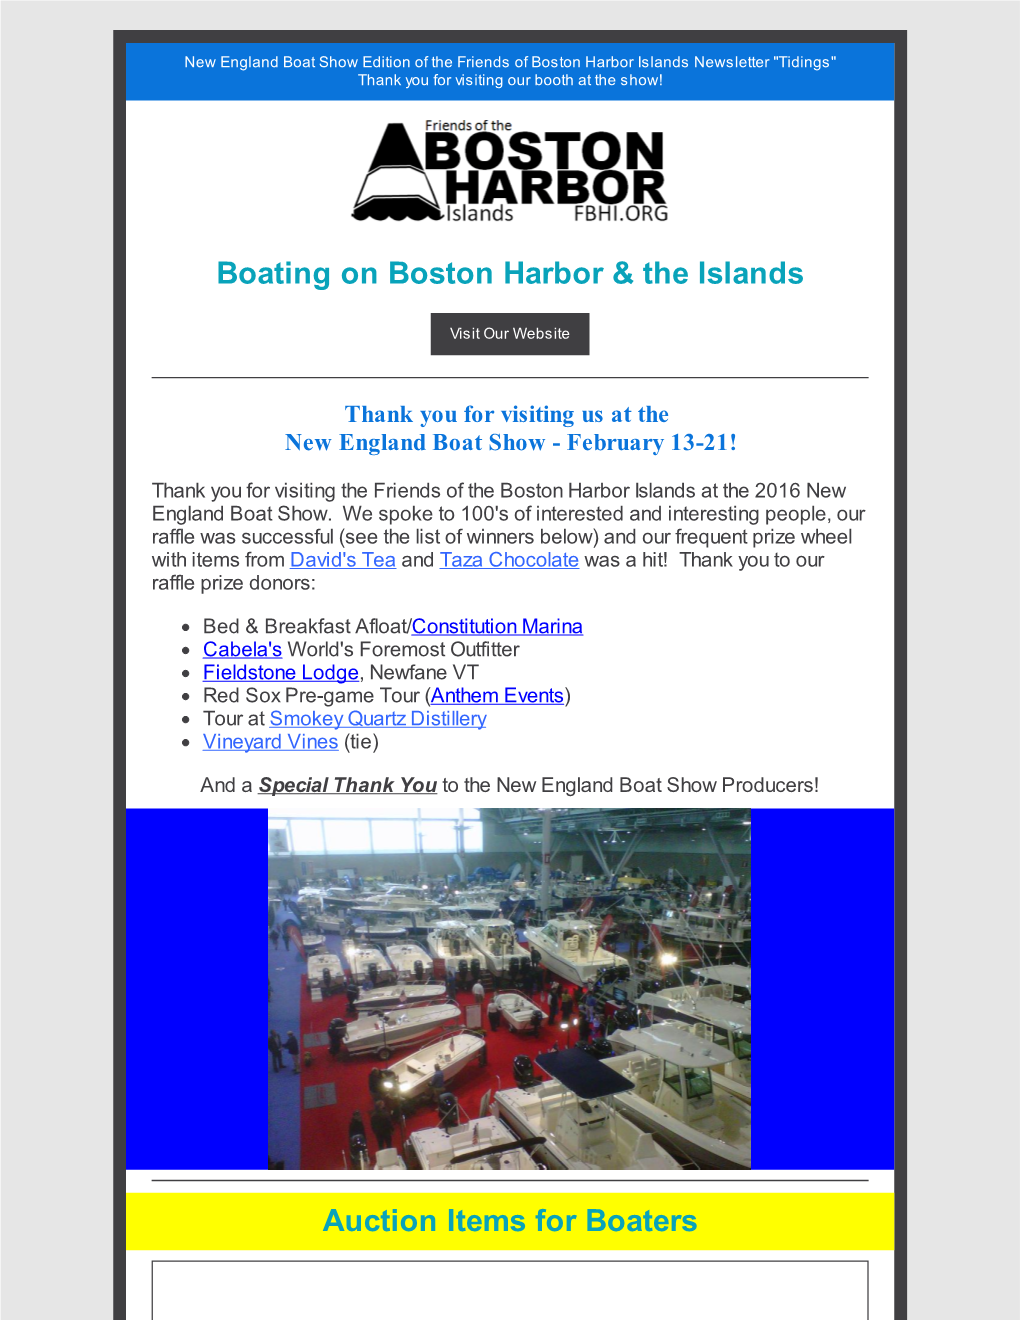 Boating on Boston Harbor & the Islands Auction Items for Boaters